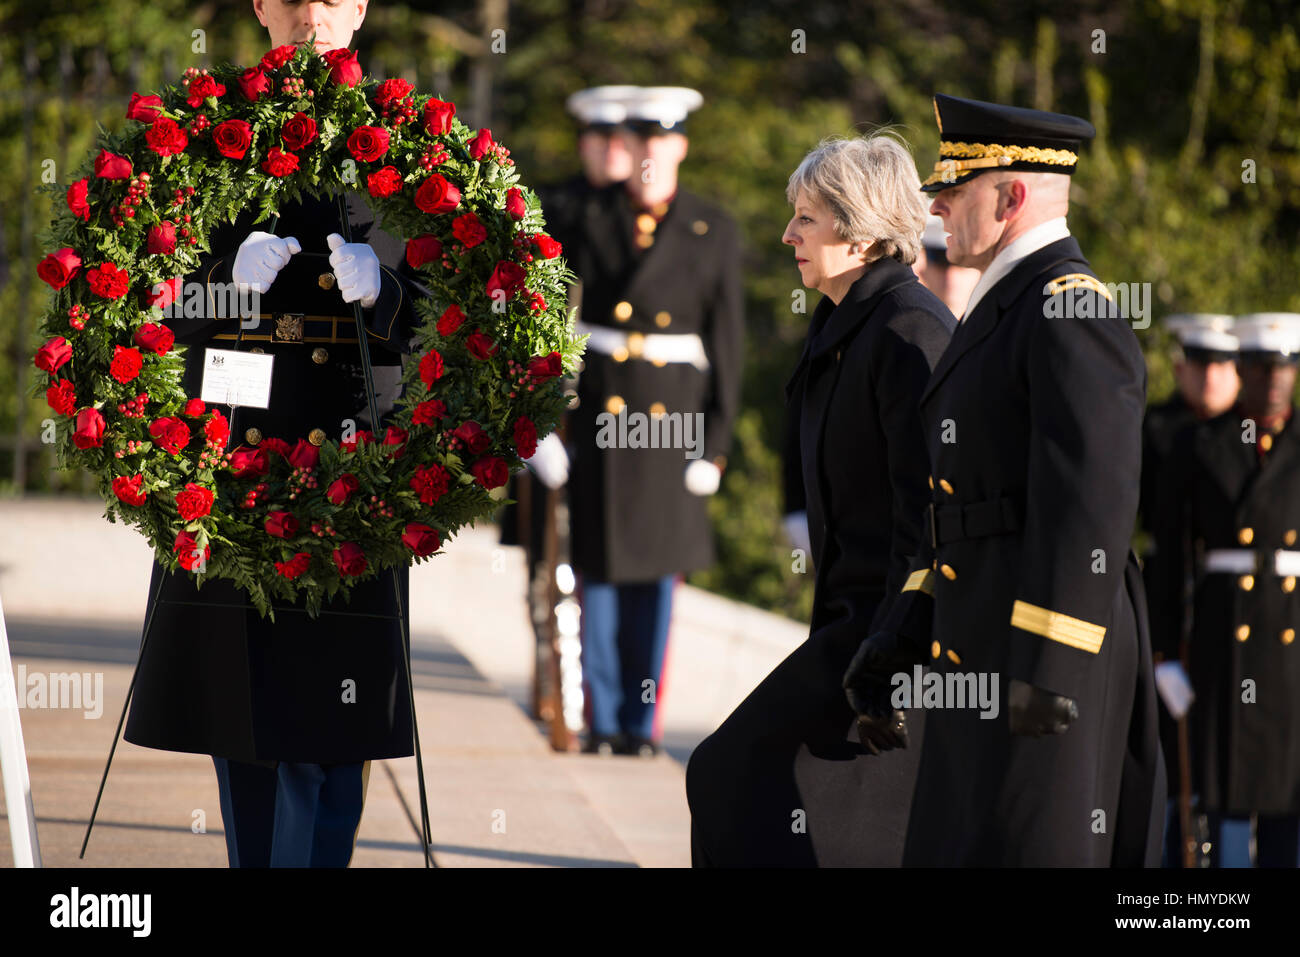 U.S. Army Commanding General Bradley Becker escorts British Prime Minister Theresa May to the Tomb of the Unknown Soldier during a wreath laying ceremony at the Arlington National Cemetery January 27, 2017 in Arlington, Virginia. Stock Photo